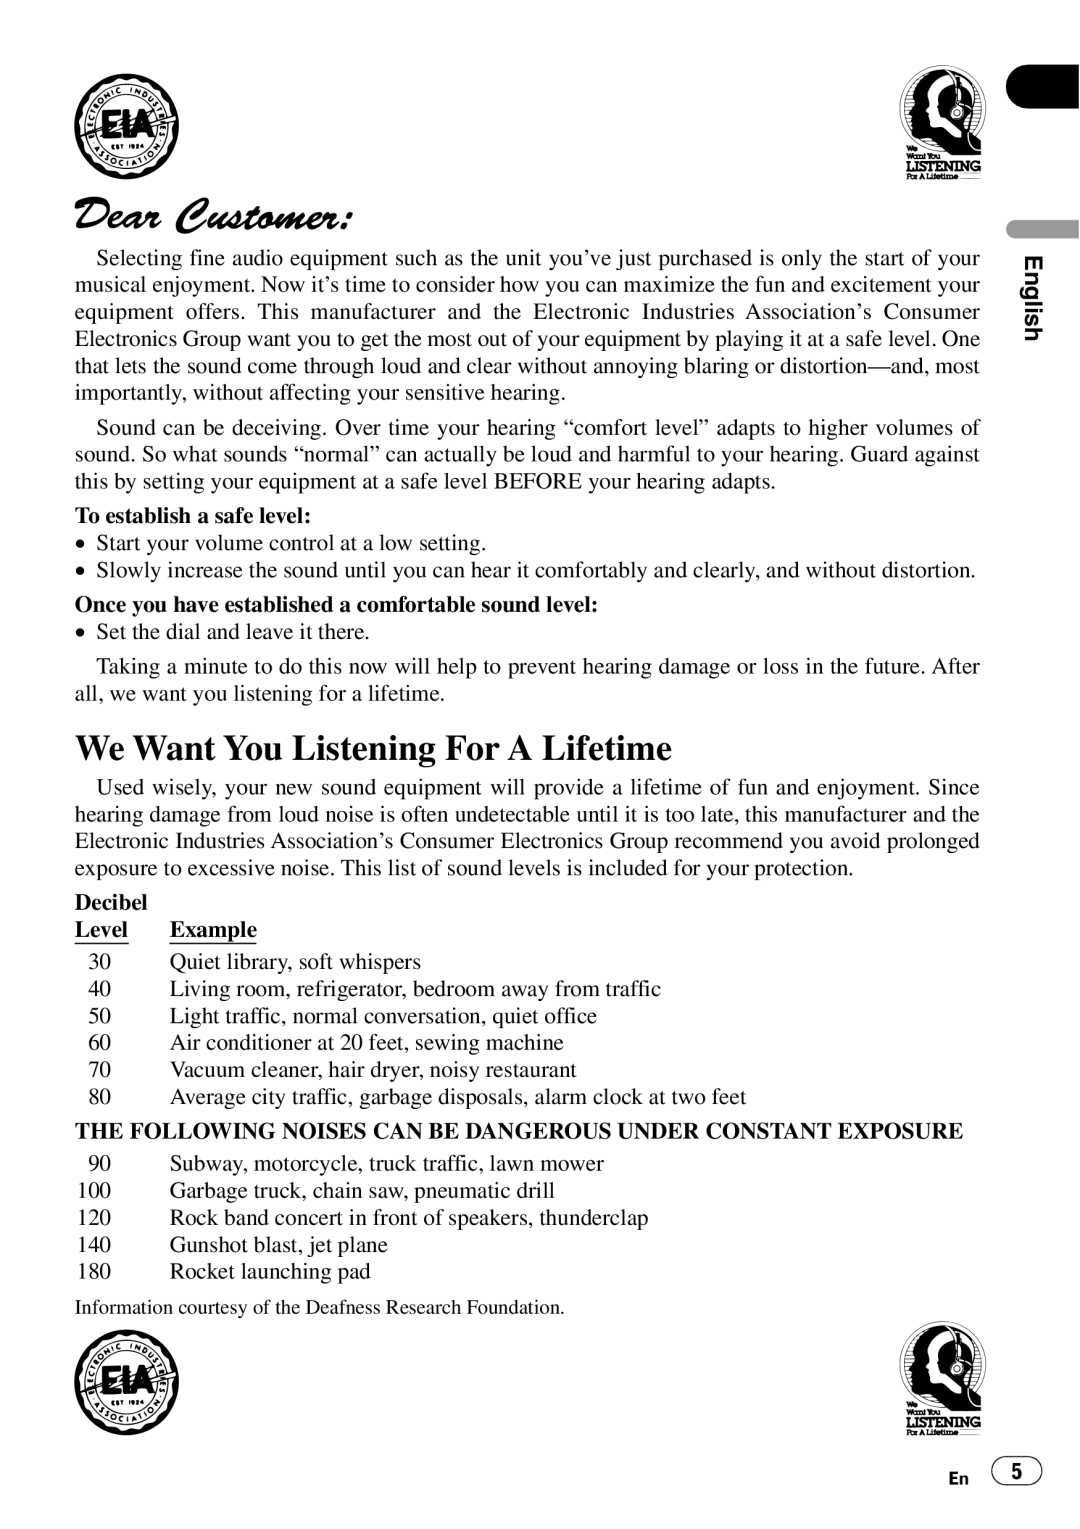 Pioneer DEH-P770MP operation manual We Want You Listening For A Lifetime, To establish a safe level, Decibel Level Example 